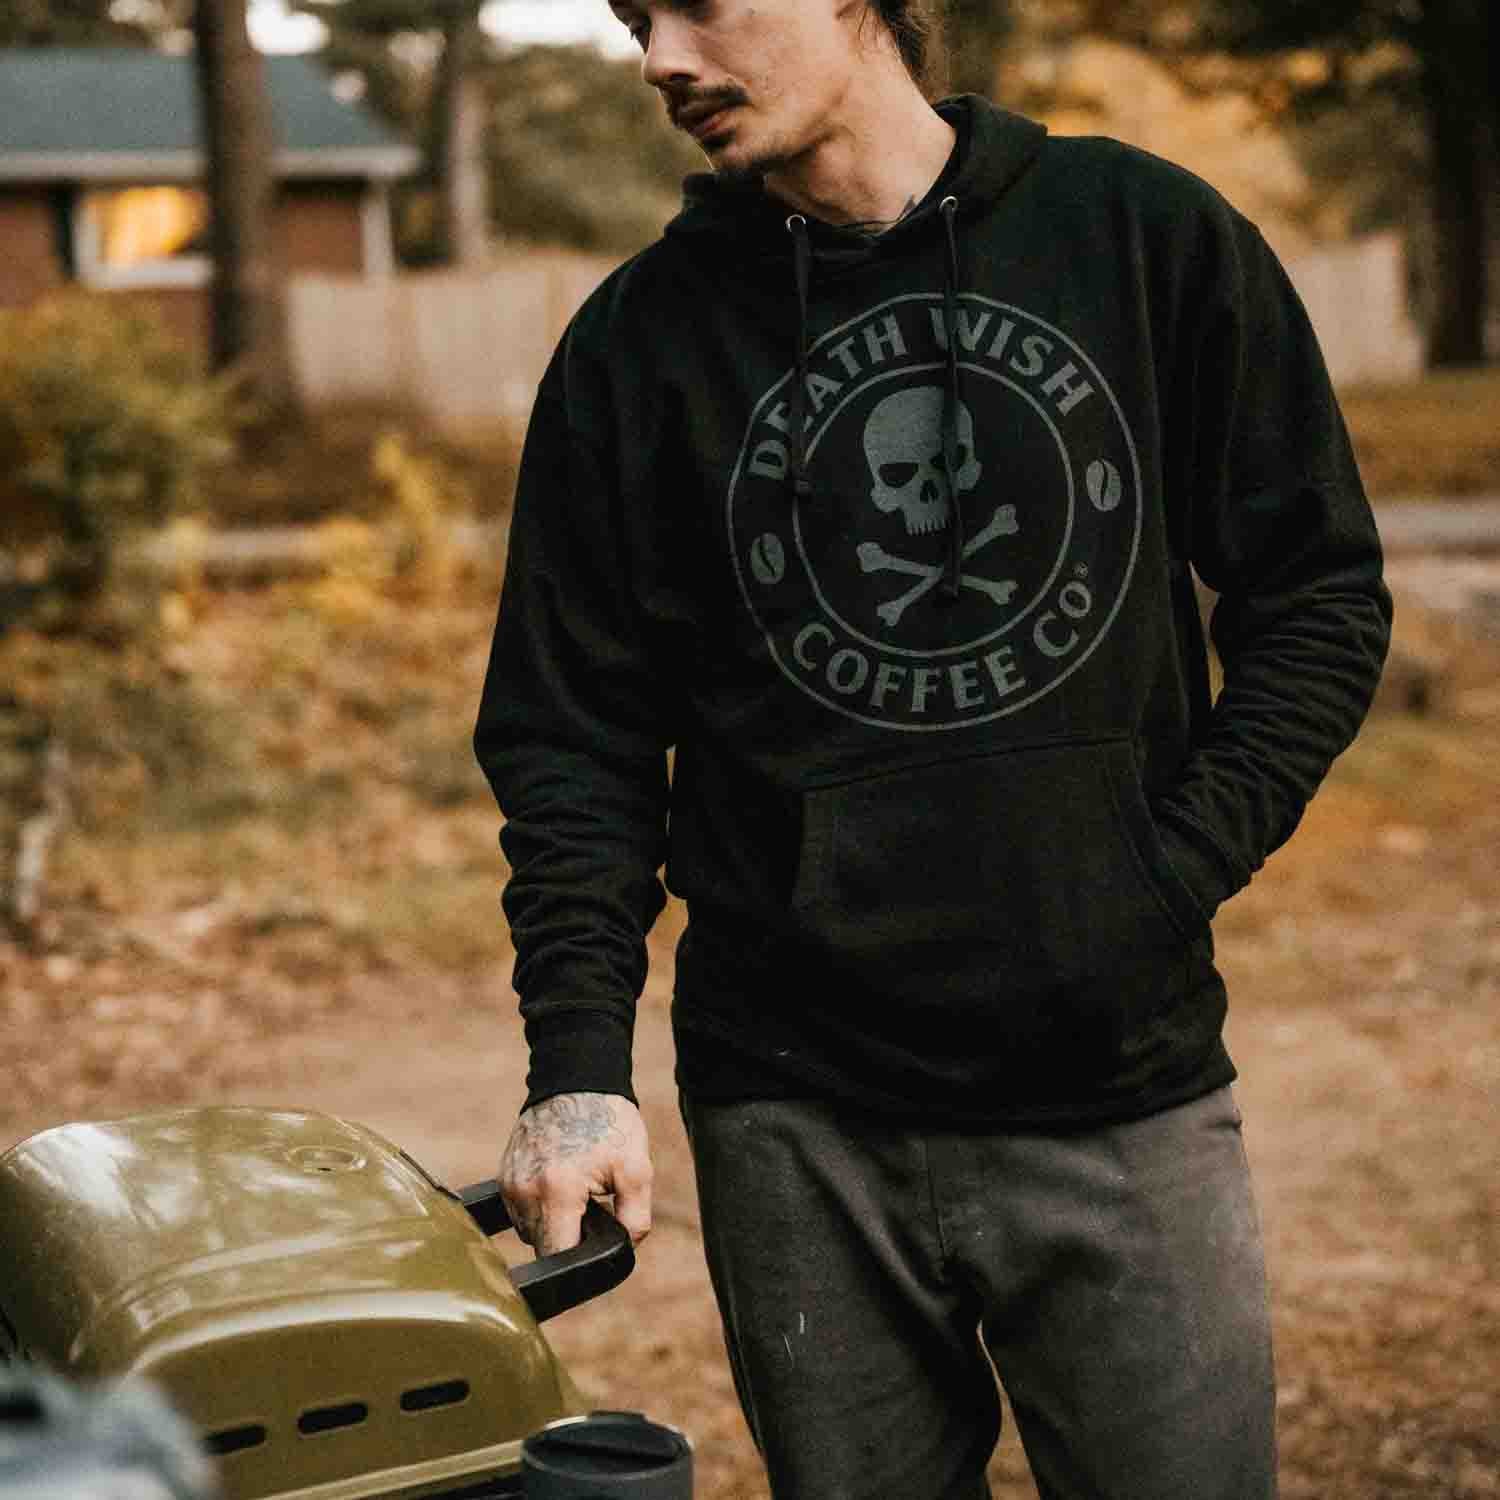 Cooking on a portable grill wearing the Death Wish Coffee Shadow Logo Hoodie.